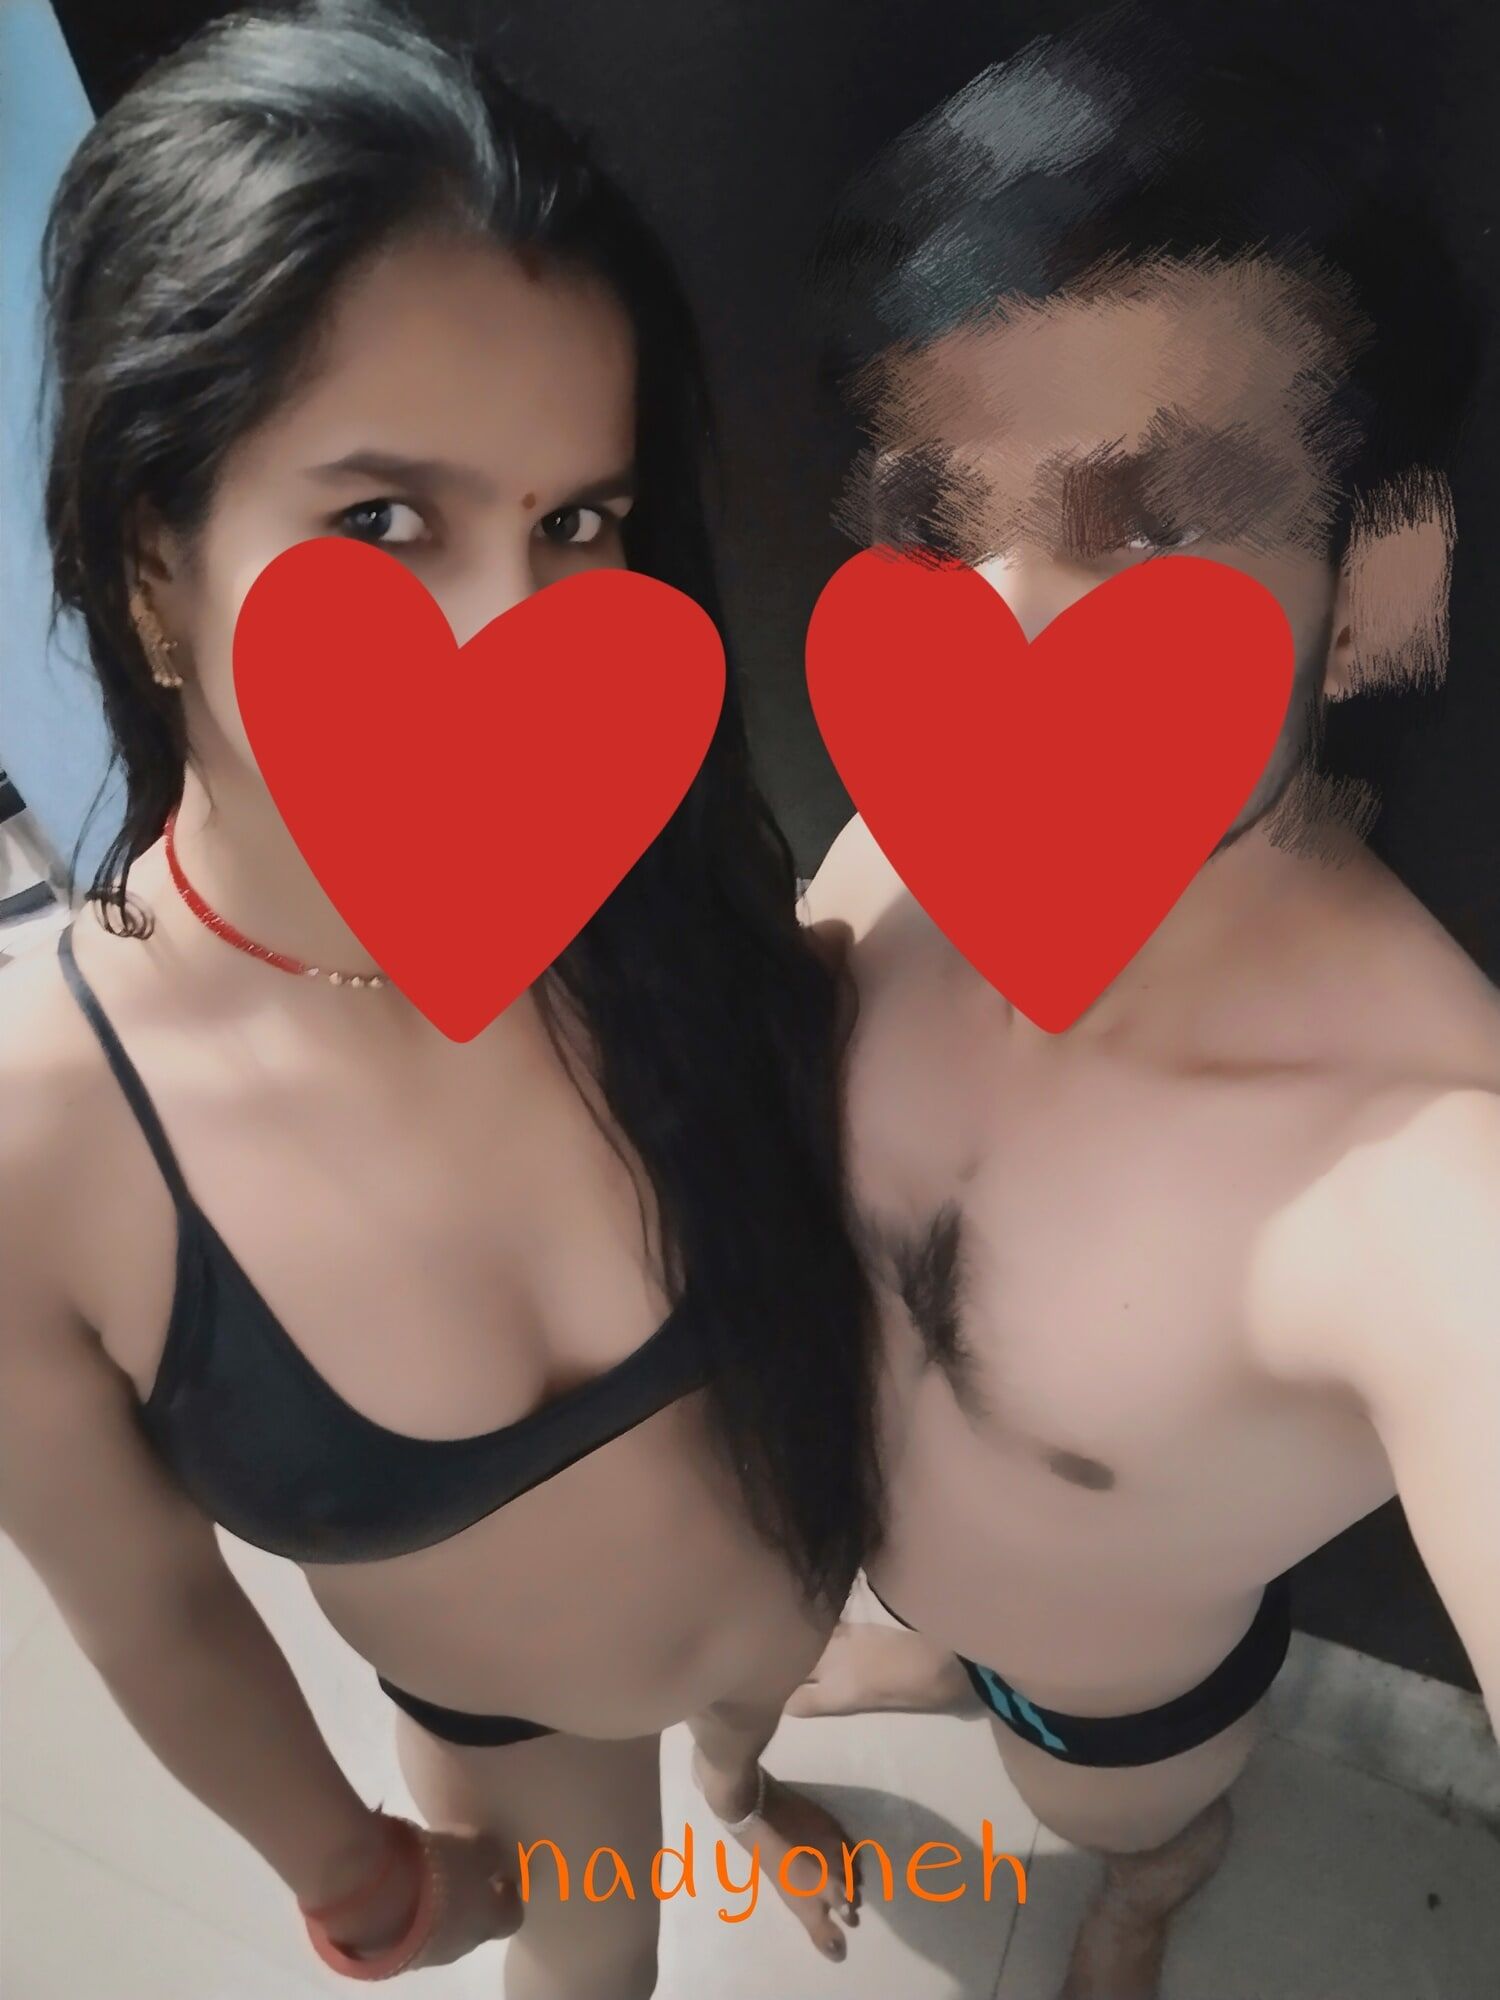 Me and my horny wife jiya .have some fun time photos  #10